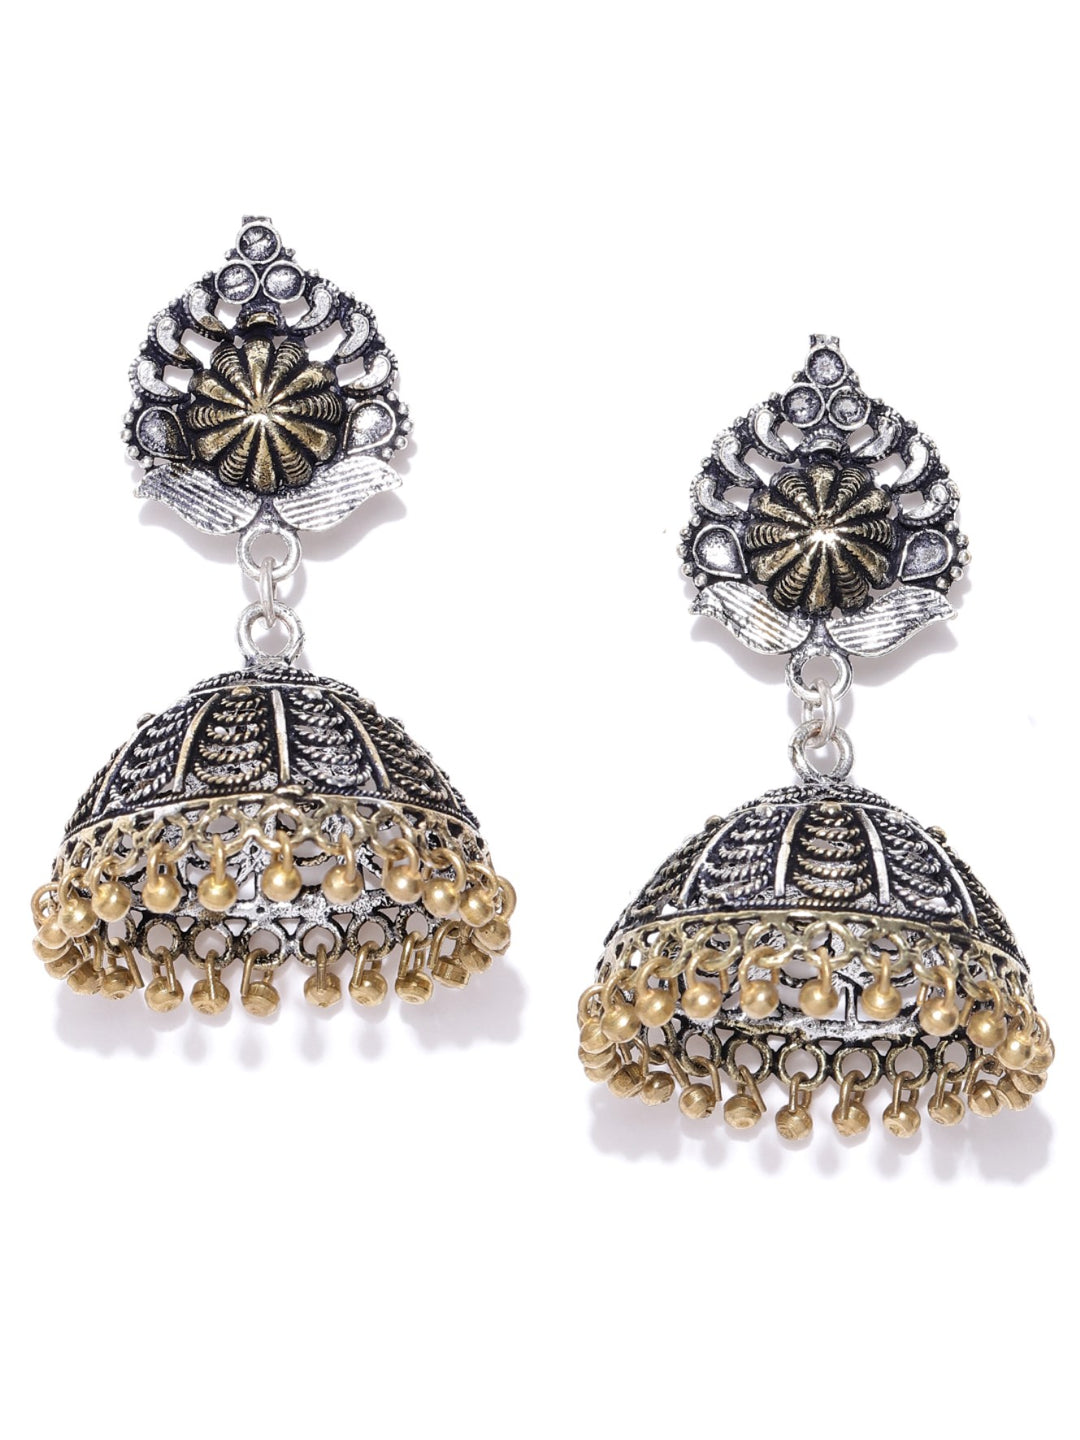 German Silver With Gold Tone Components Jhumka Earrings For Women And Girls